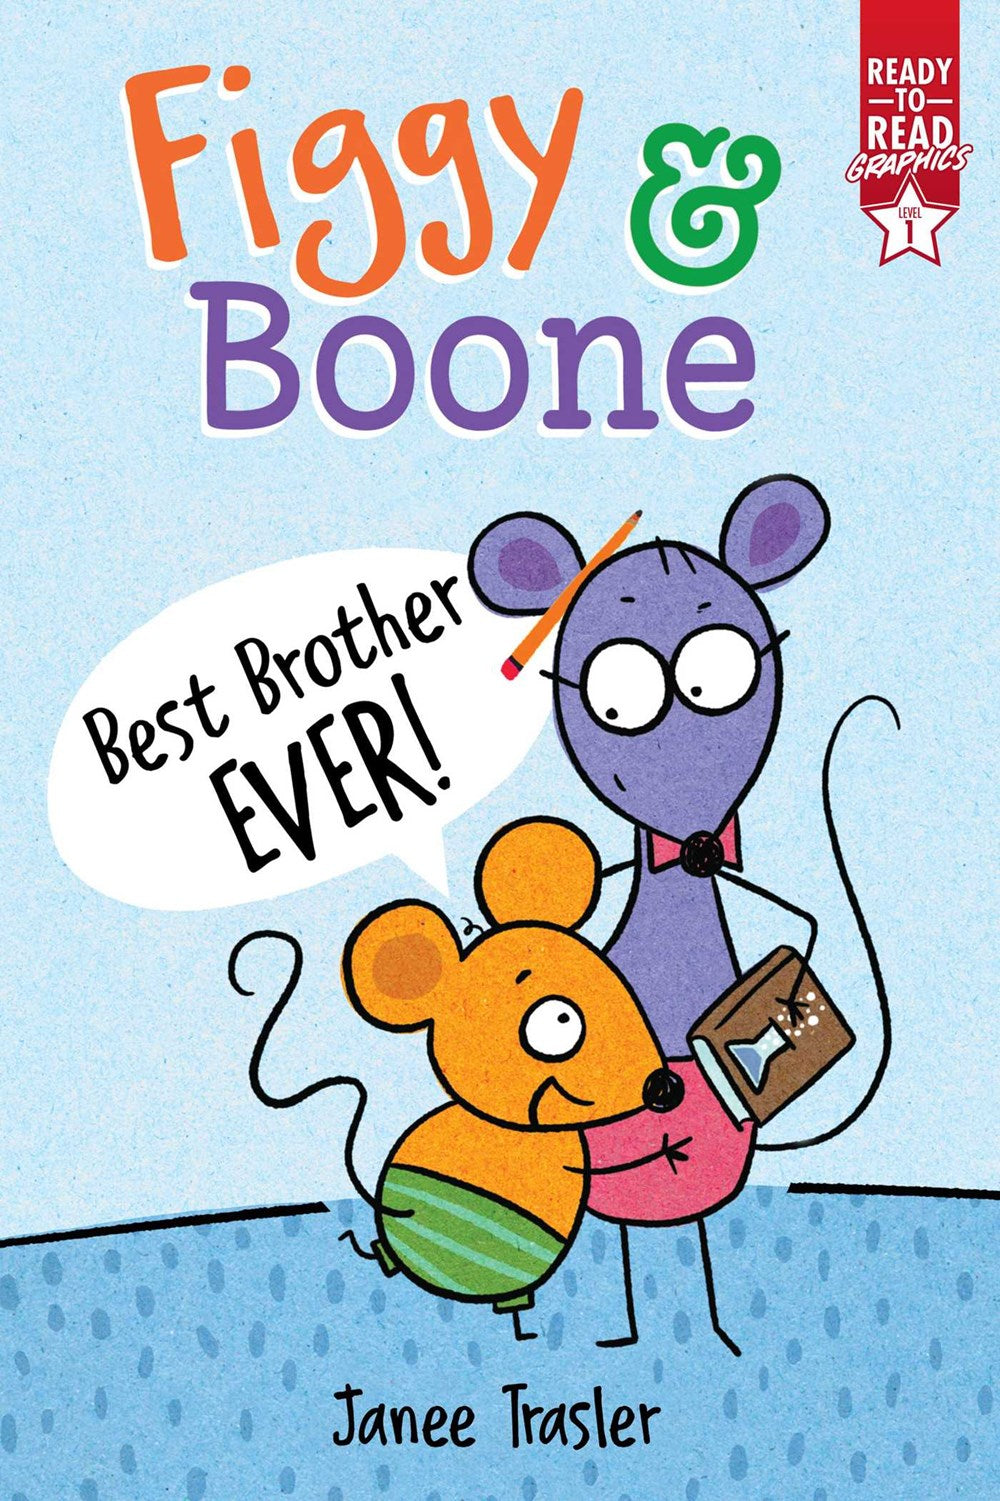 Figgy and Boone: Best Brother Ever! (Ready-to-Read Graphics Level 1)